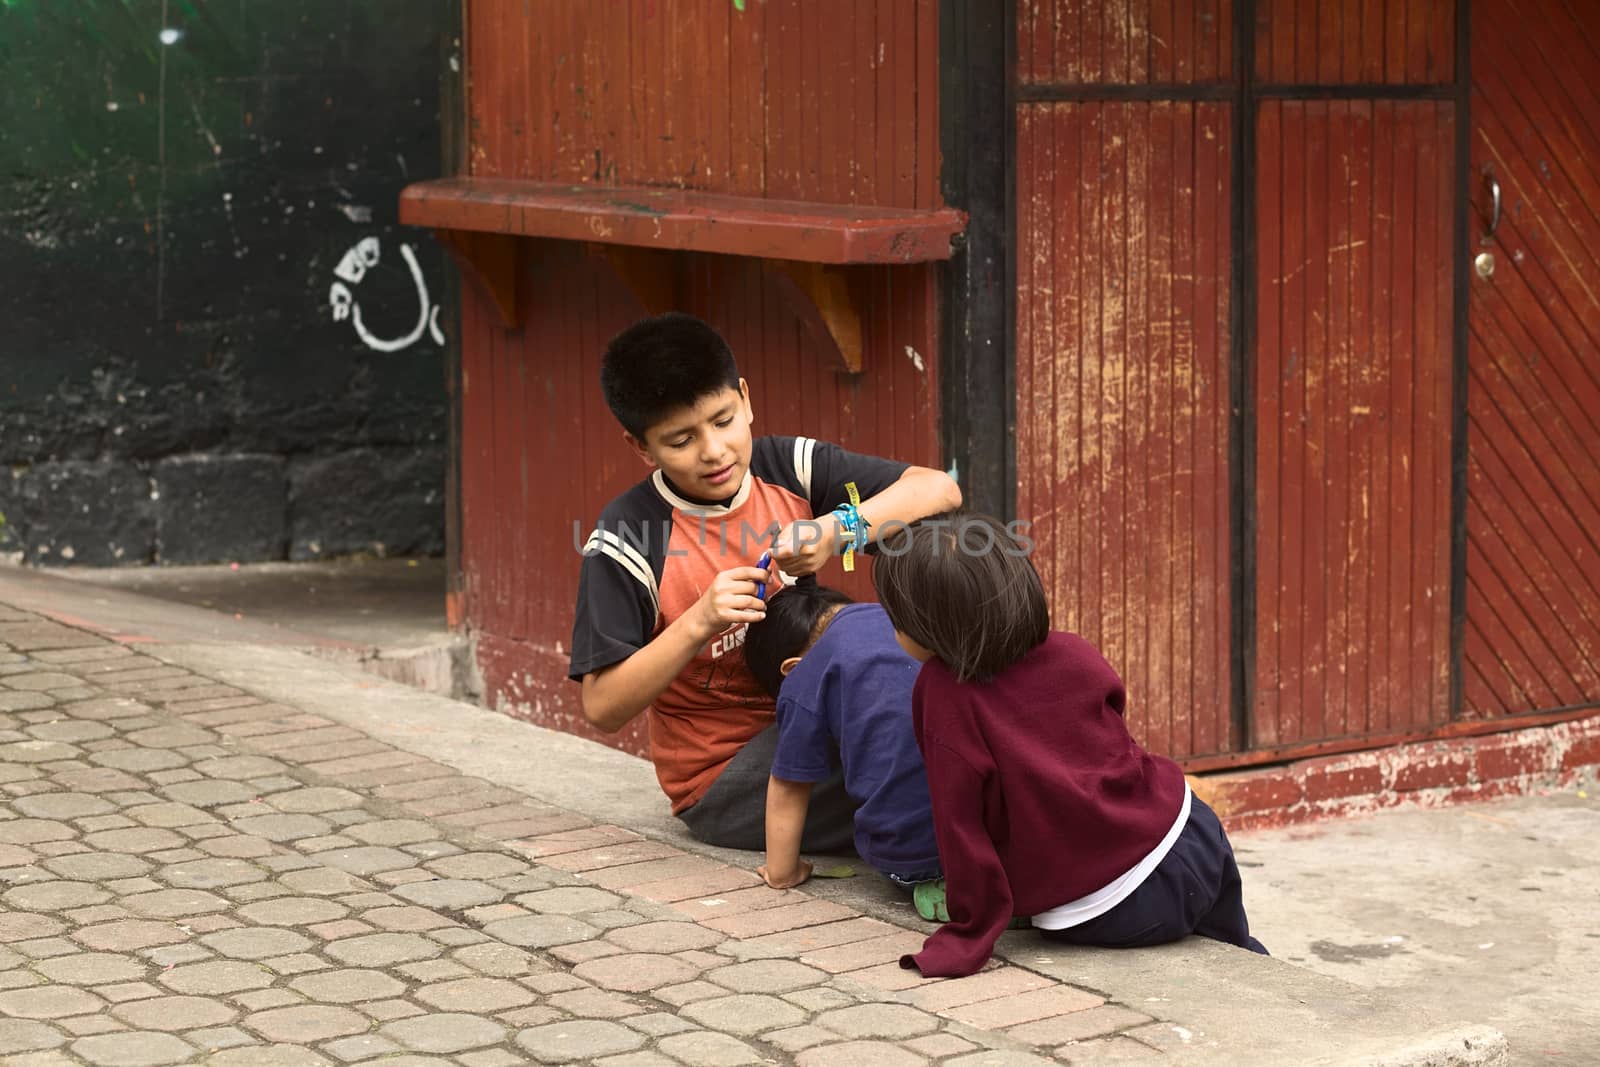 BANOS, ECUADOR - FEBRUARY 25, 2014: Unidentified boy cutting the hair of another child on the pavement on February 25, 2014 in Banos, Ecuador.  